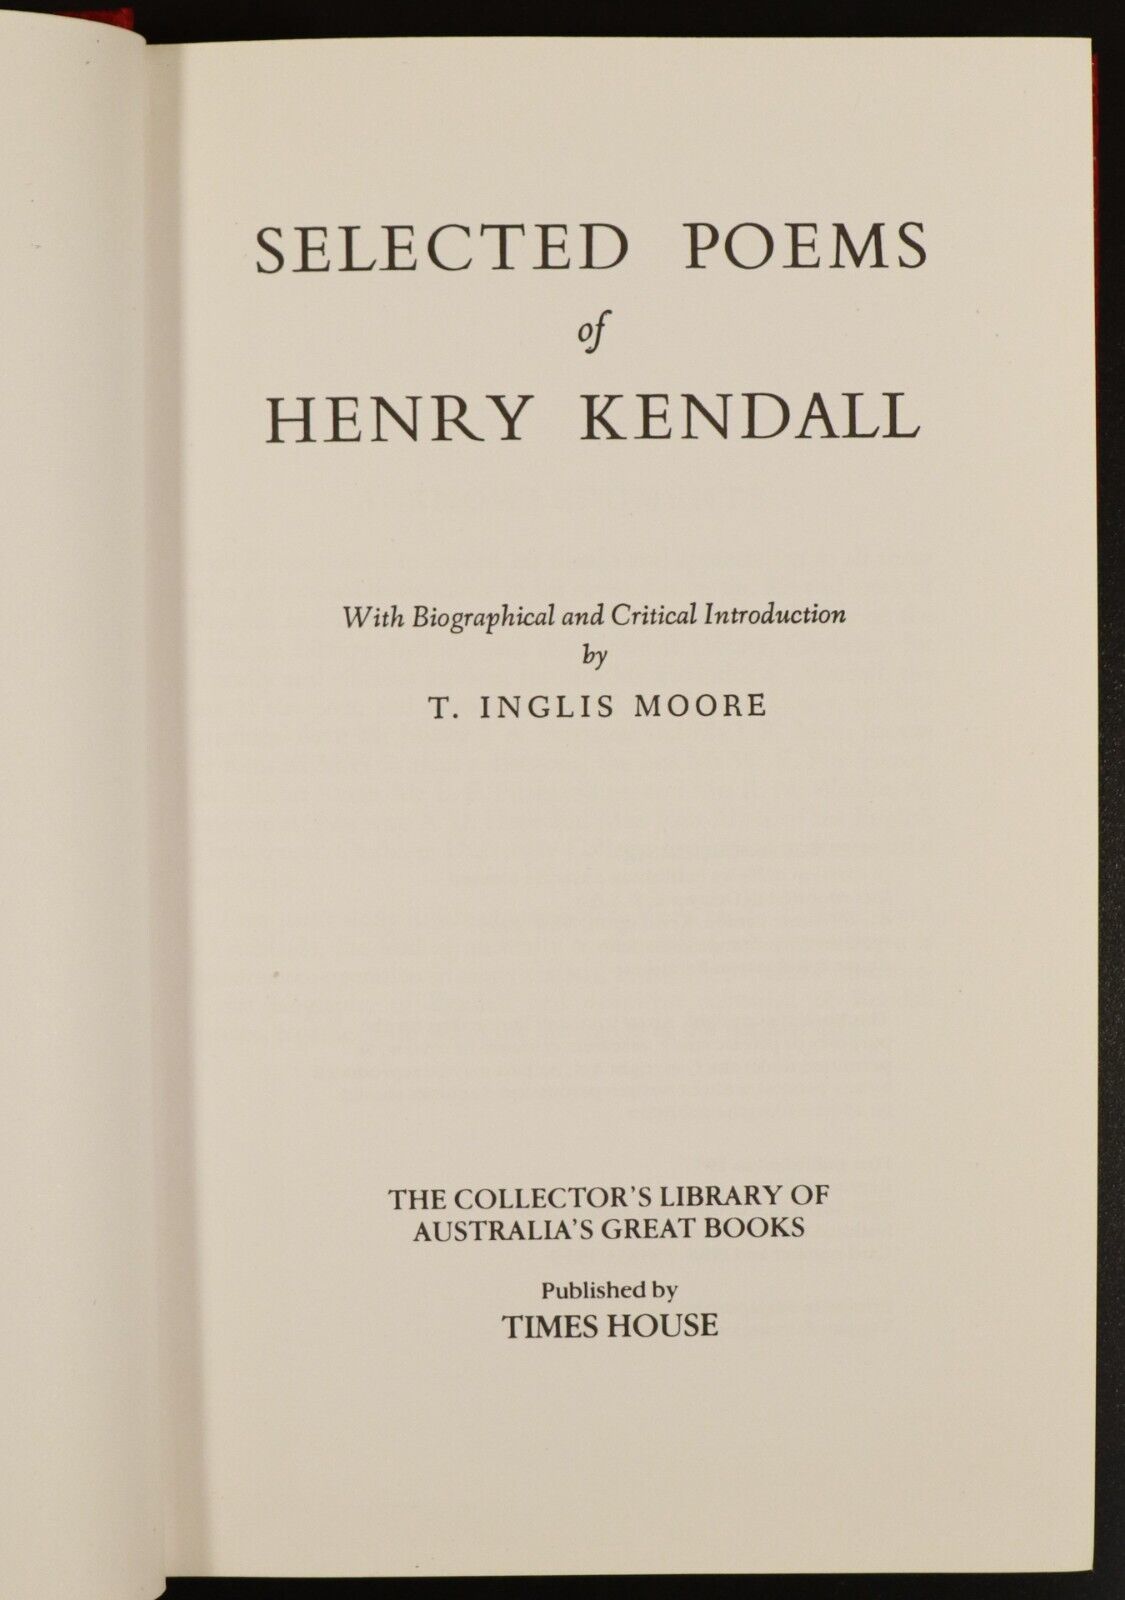 1987 Selected Poems Of Henry Kendall - Australia's Great Books Series - 0